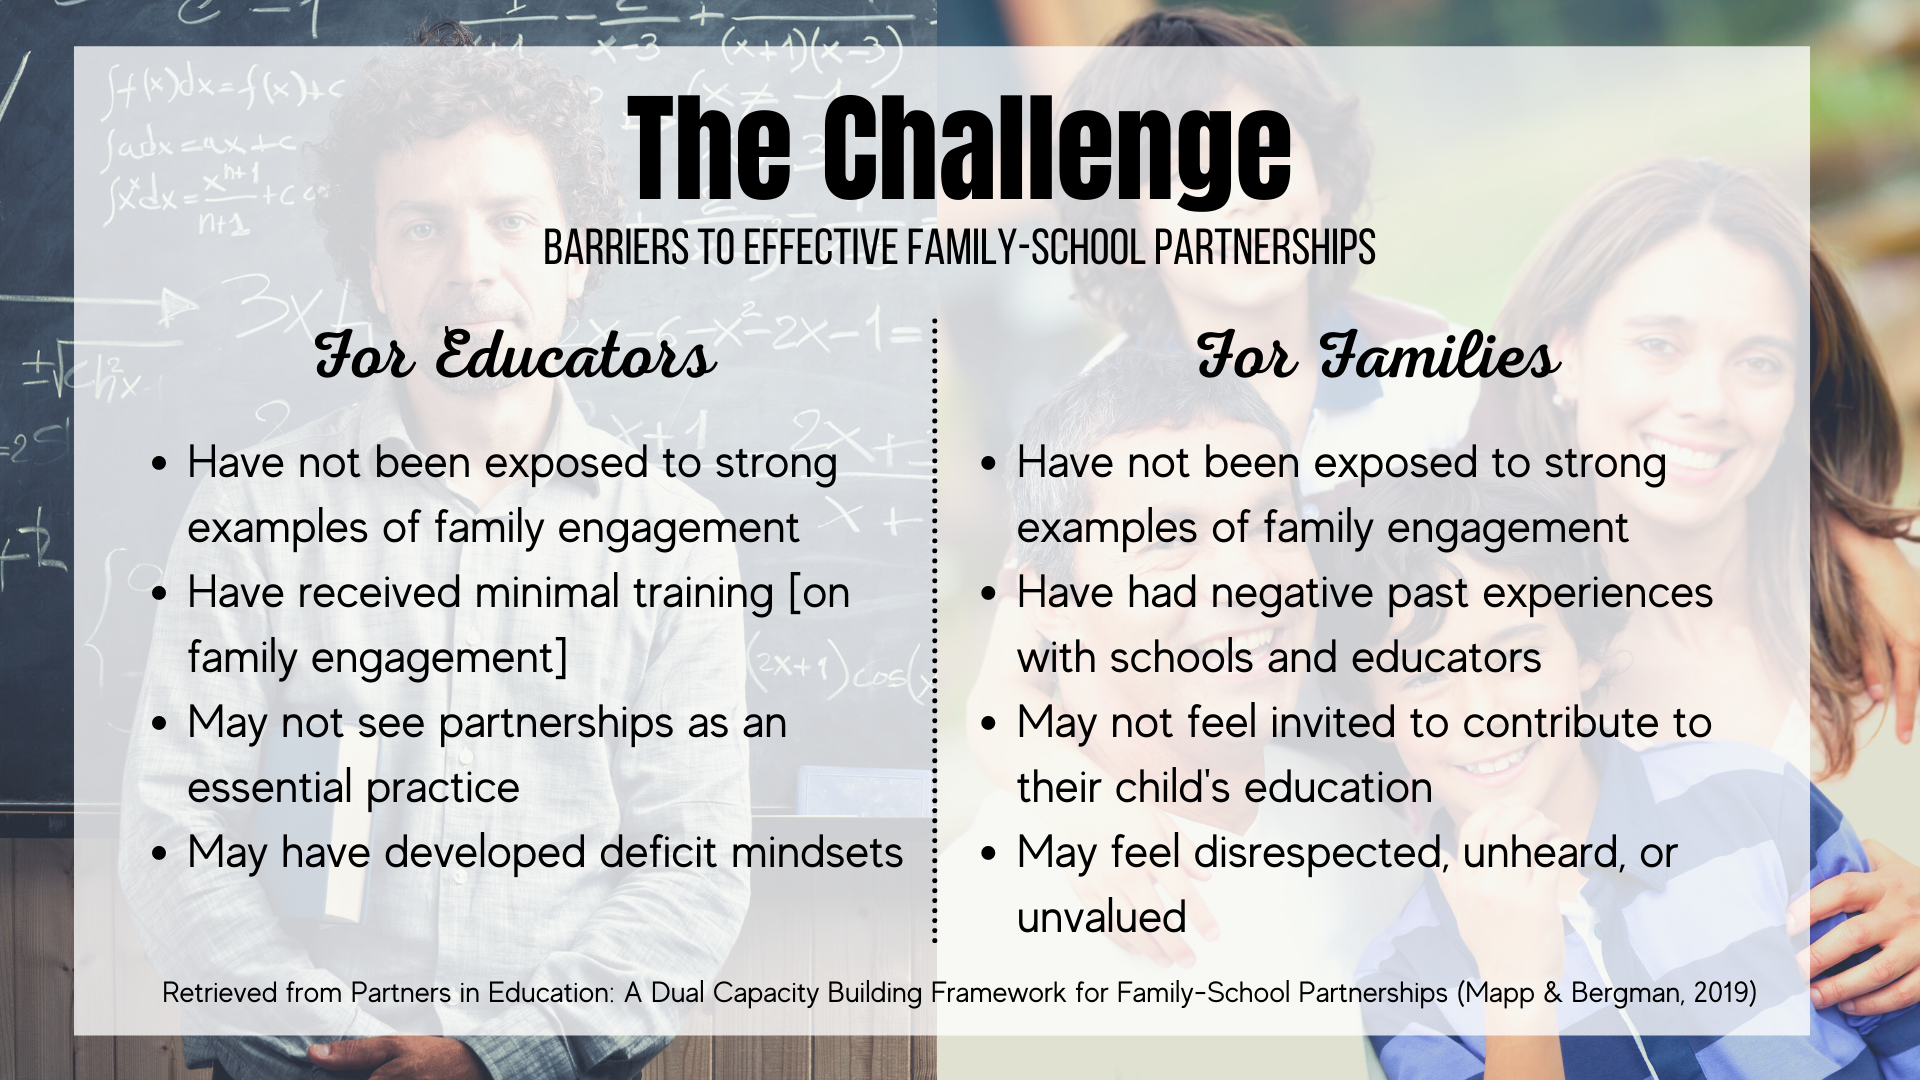 infographic describing the challenge of effective family-school partnerships. text-only link below